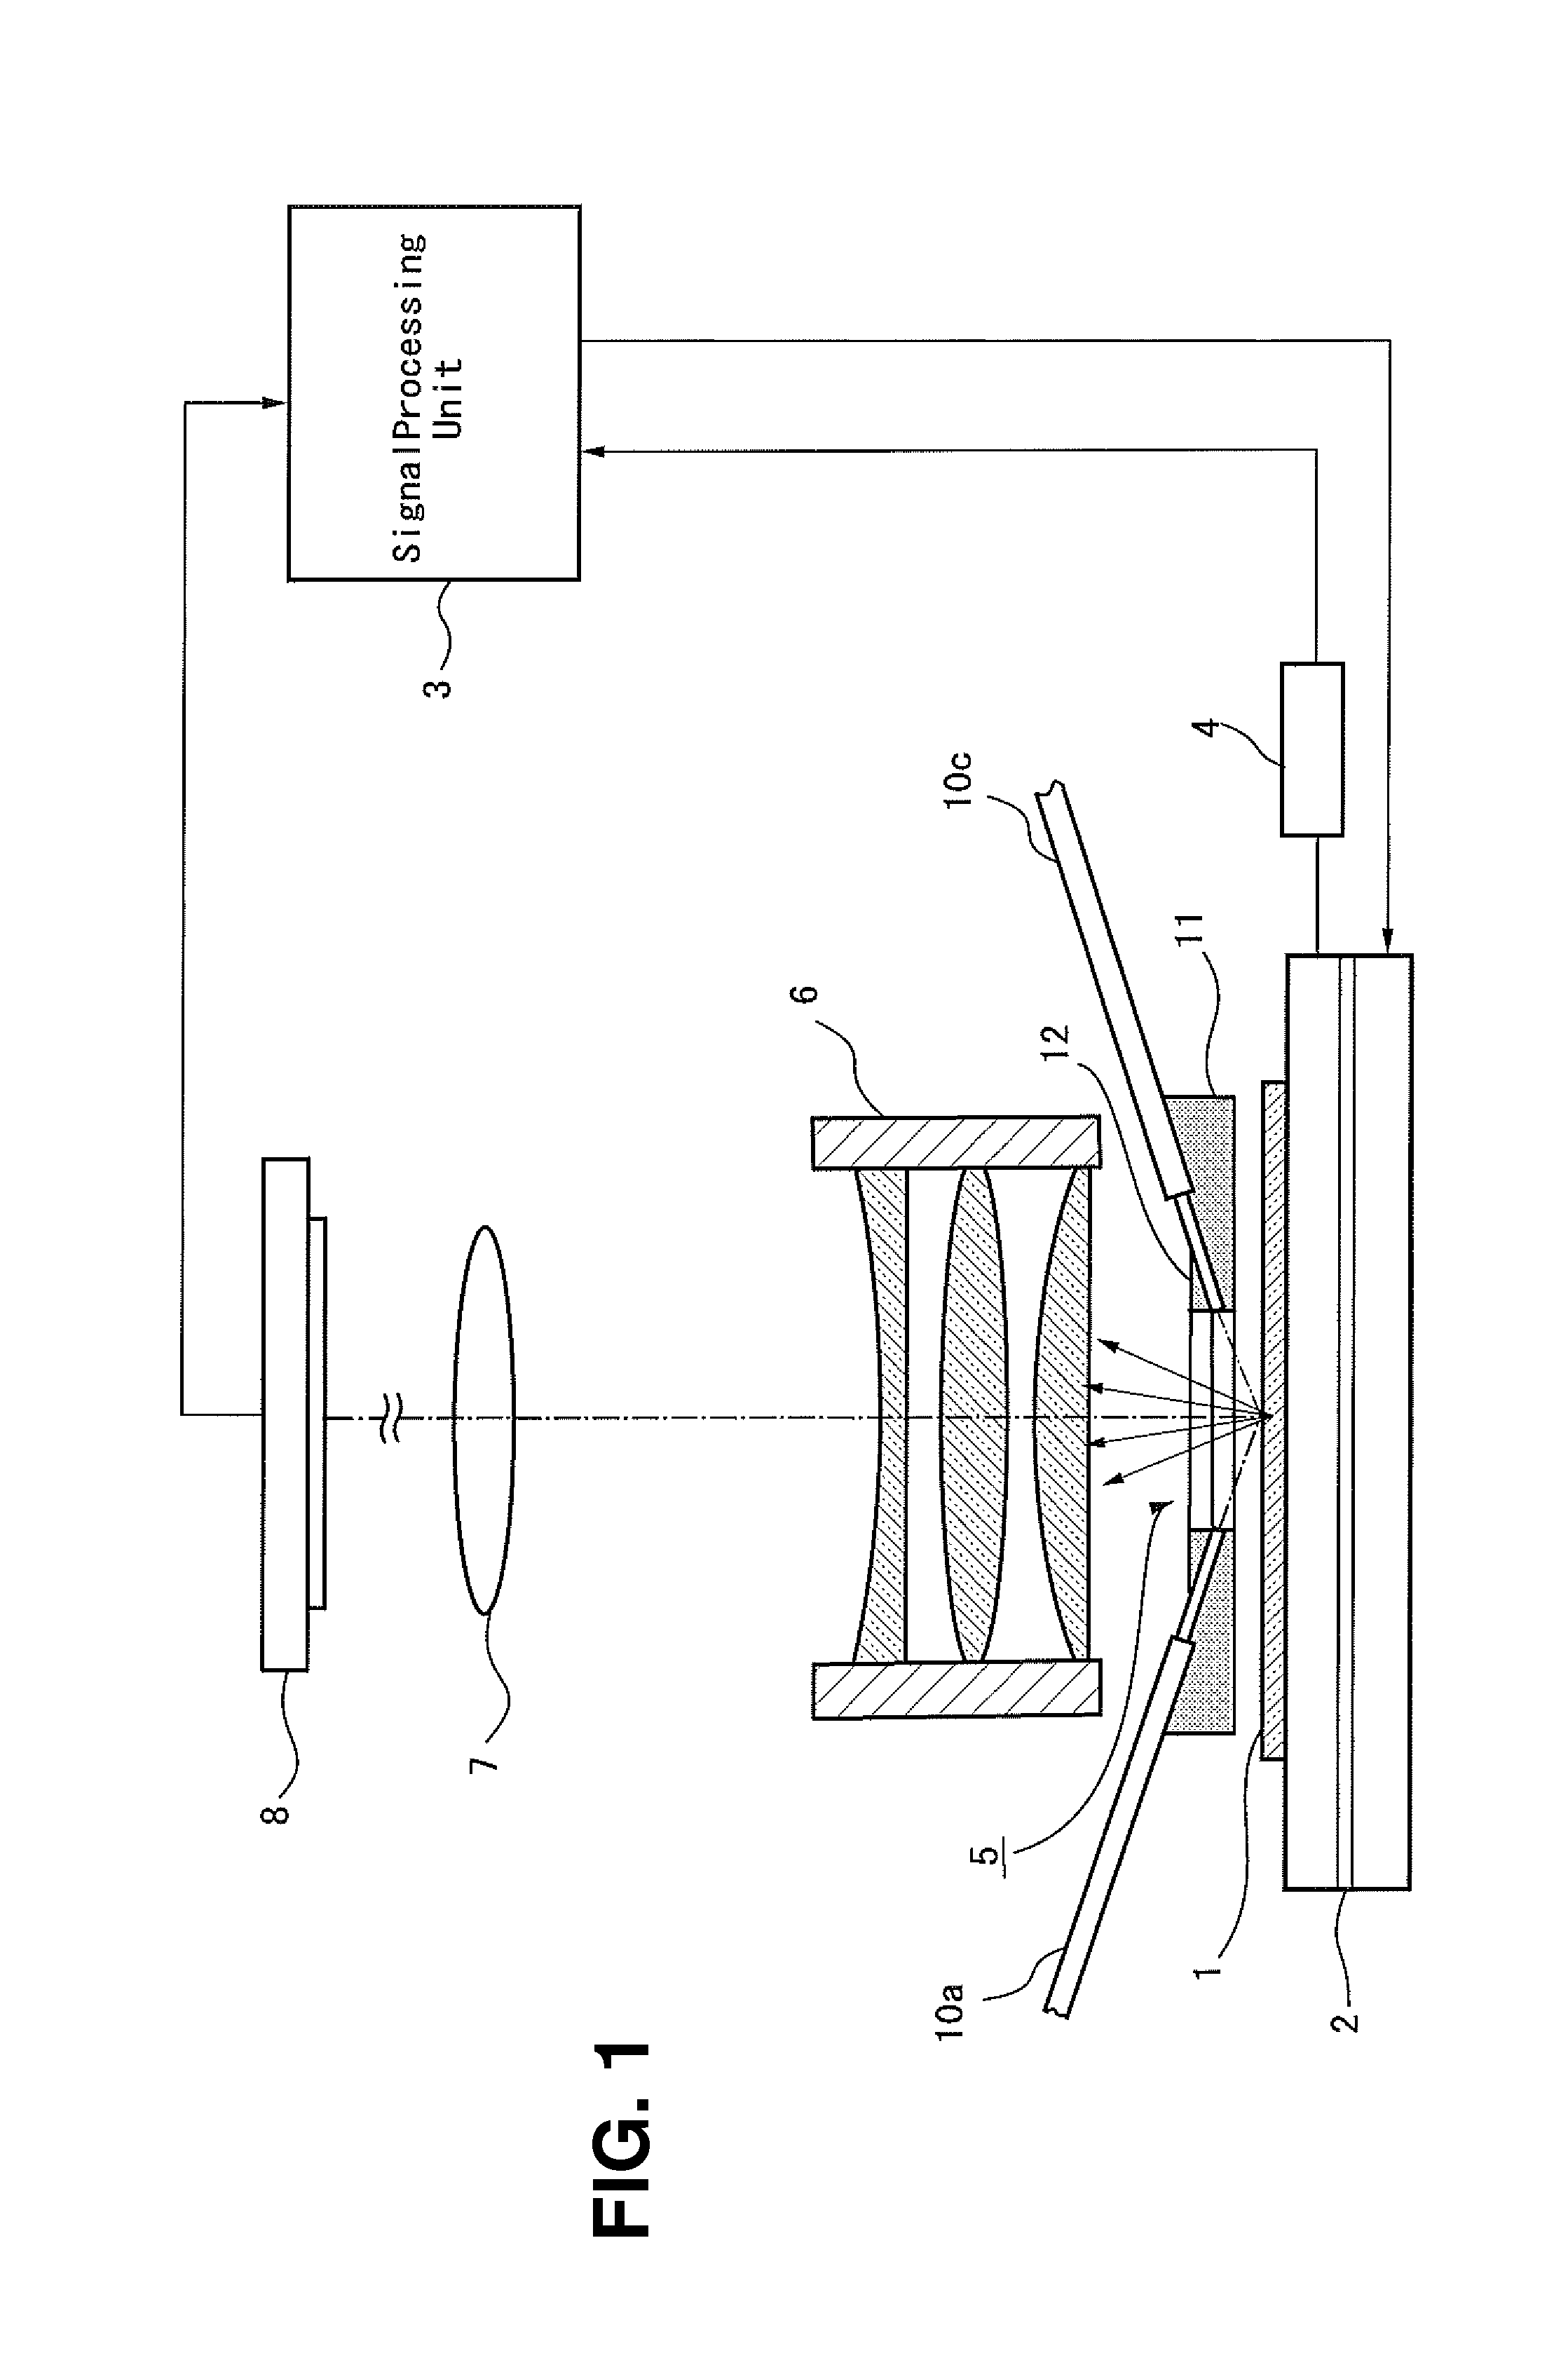 Microscope and inspection apparatus